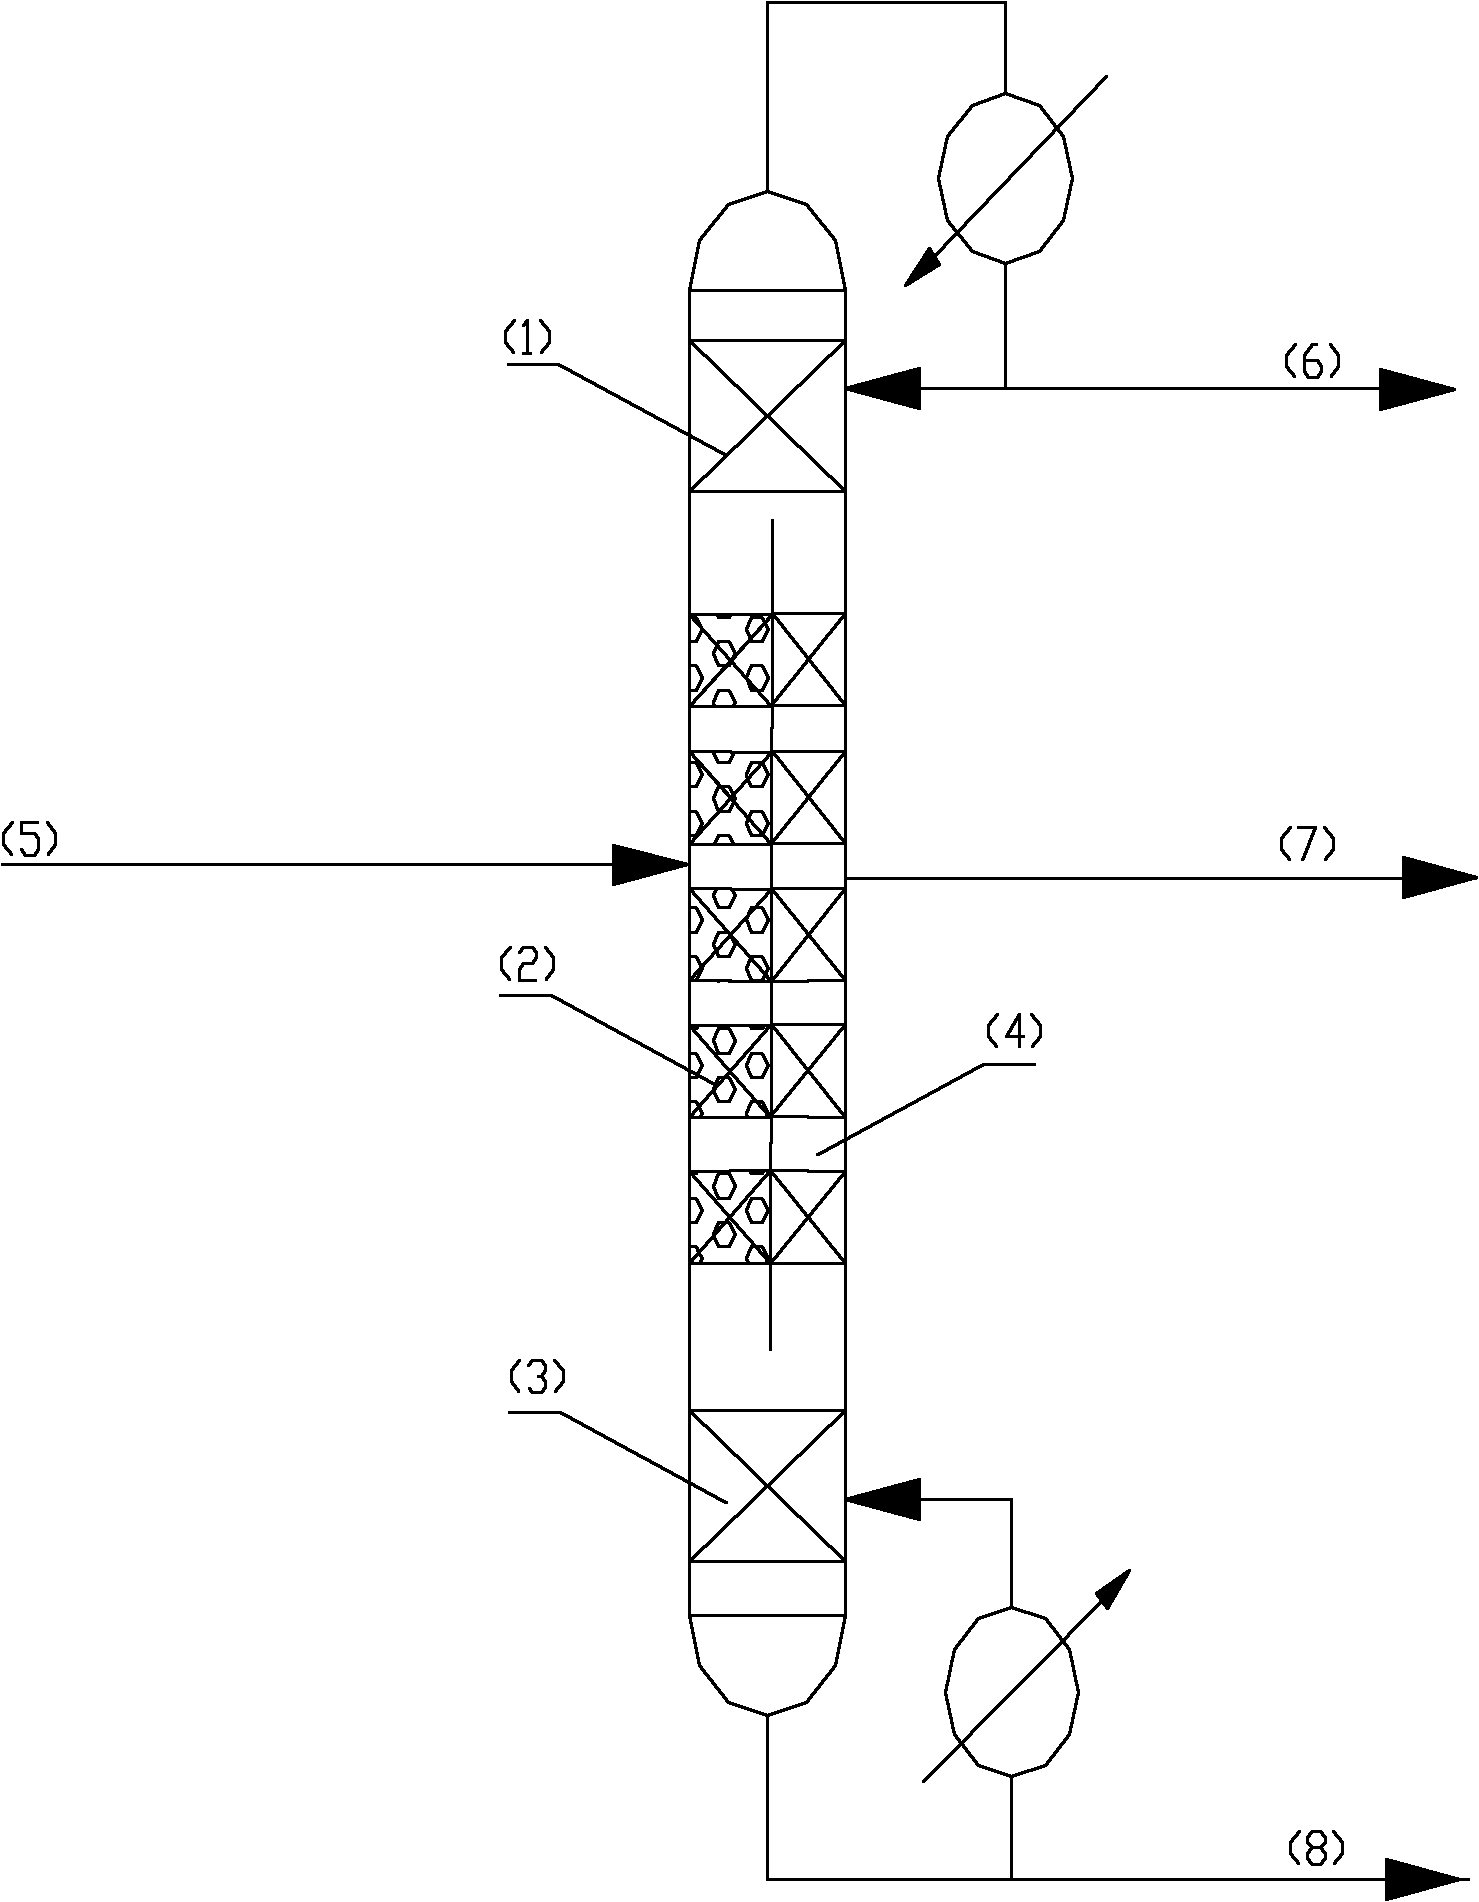 Clapboard adsorption device and method for removing boron impurities in chlorosilane system